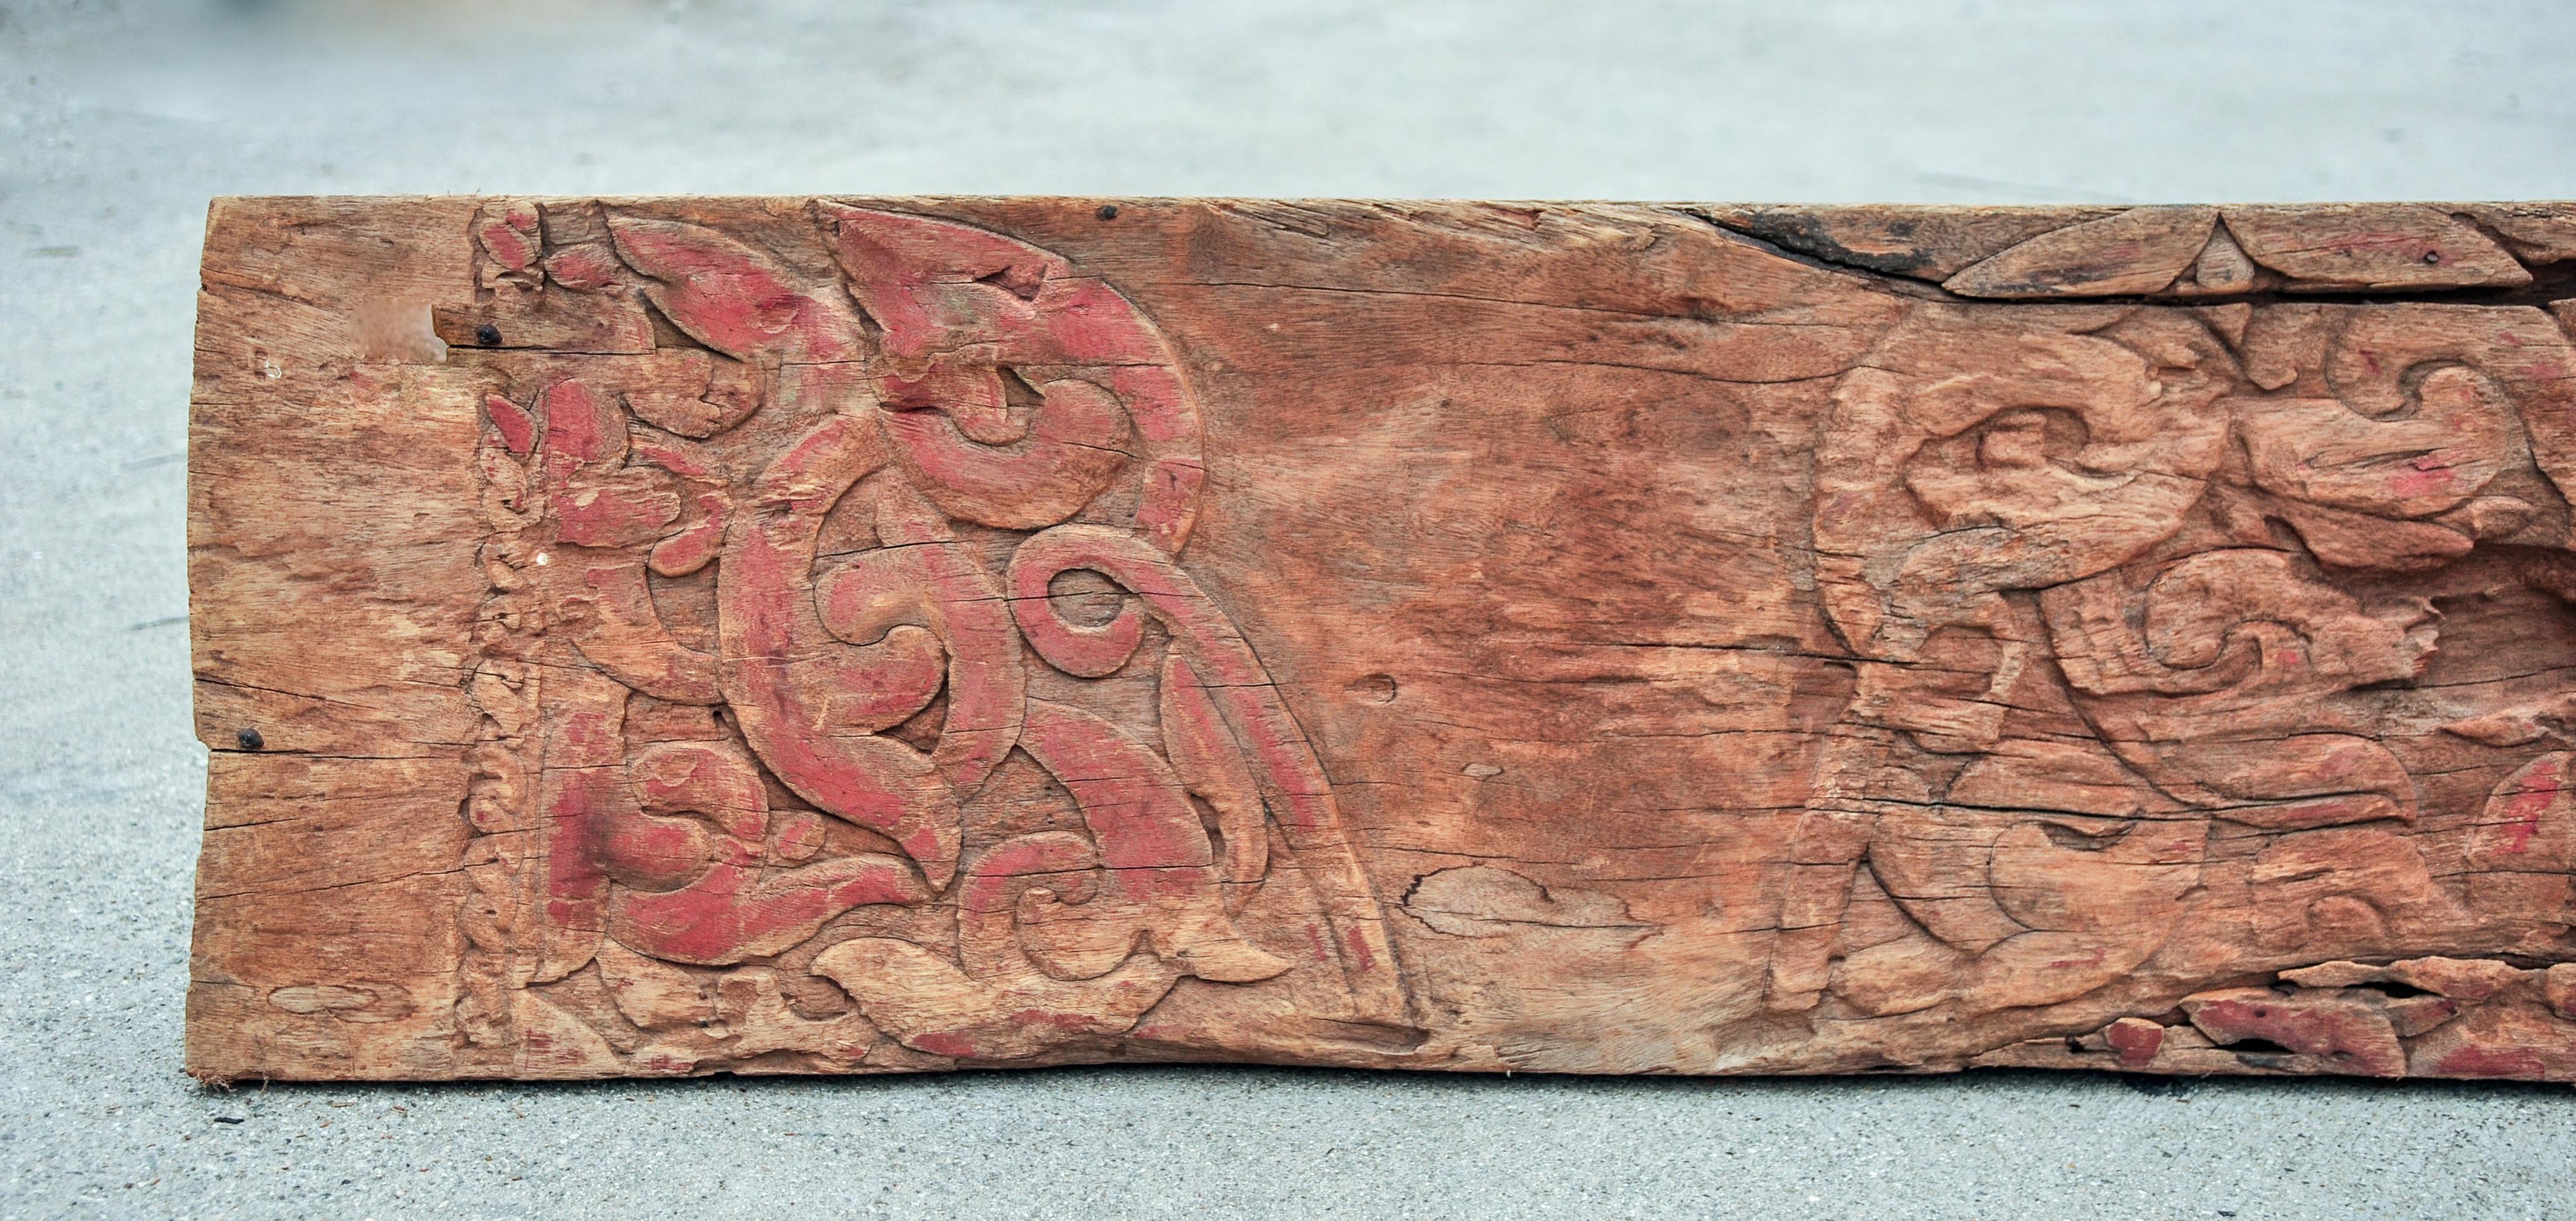 18 foot carved architectural beam. Dayak, Borneo Longhouse, mid-20th century.
This beam, taken from a Dayak Longhouse, comprises a single piece of wood and incorporates typical Dayak carved floral design elements, punctuated by remnants of original